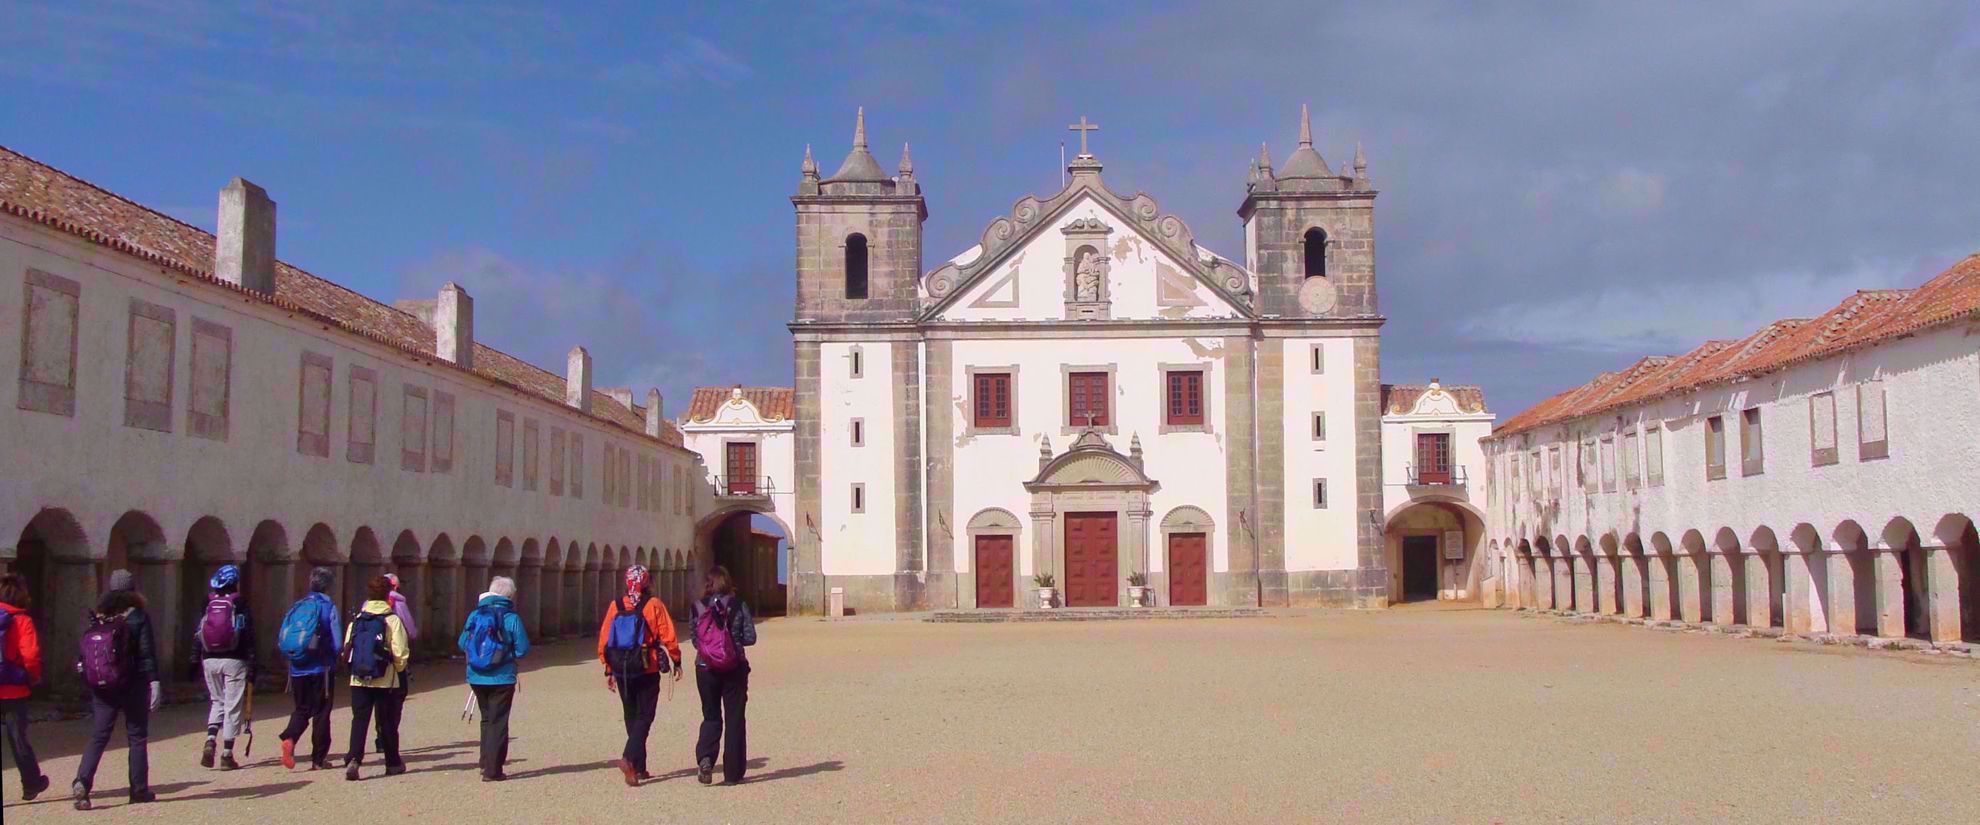 discovering stunning architecture in portugal on women's group tour